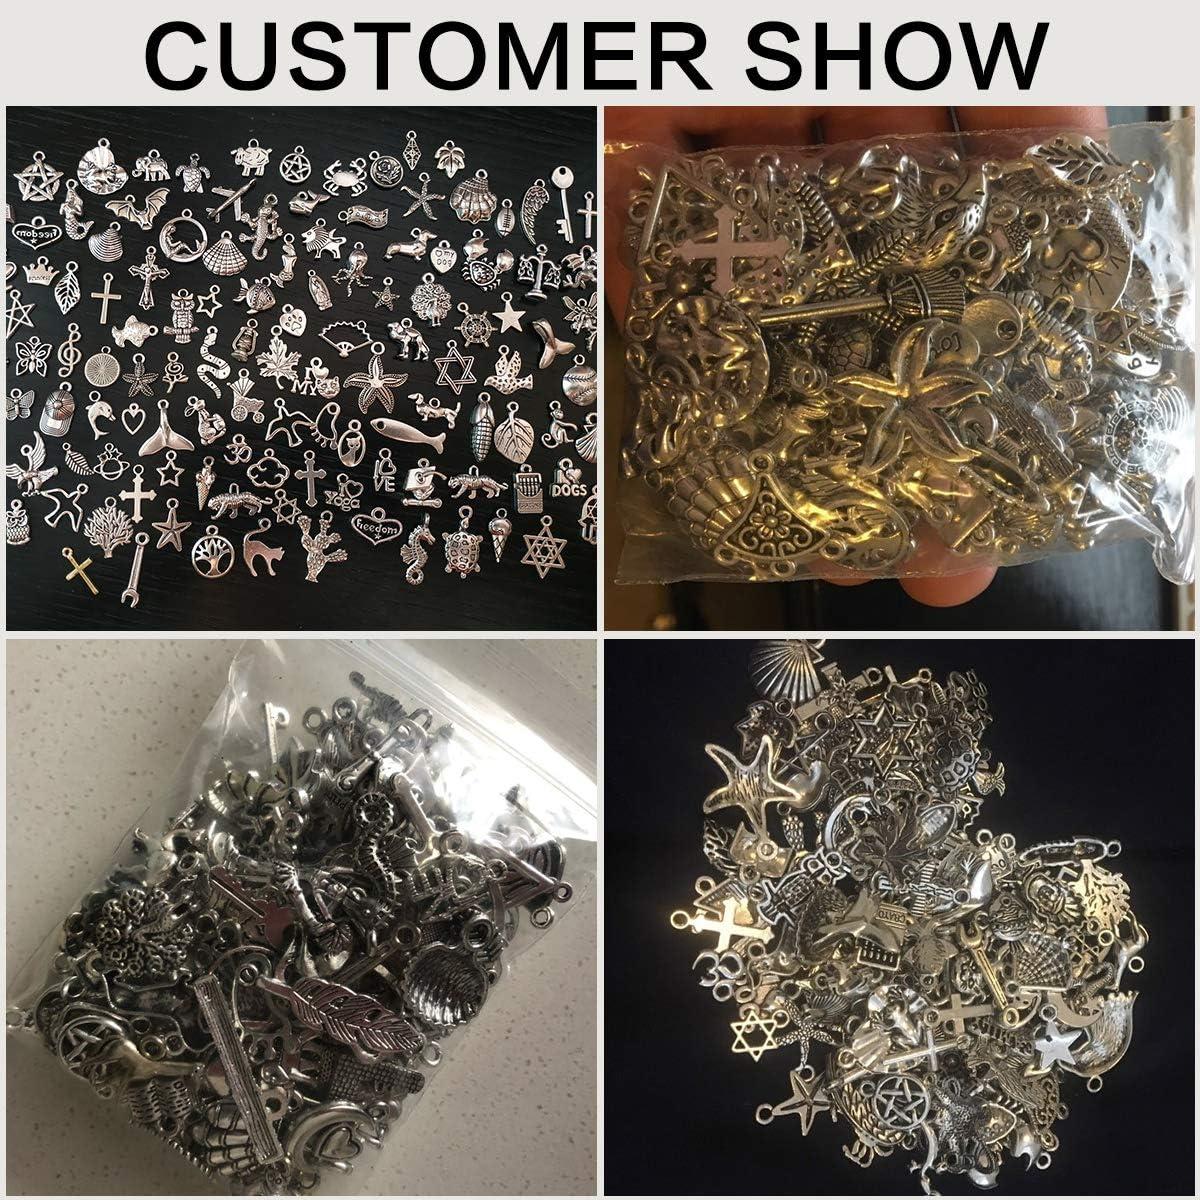 YUEAON 300pcs bulk lots charms for jewelry making supplies kit craft  accessories bracelet necklace pendant earring keychain tibetan silver  wholesale